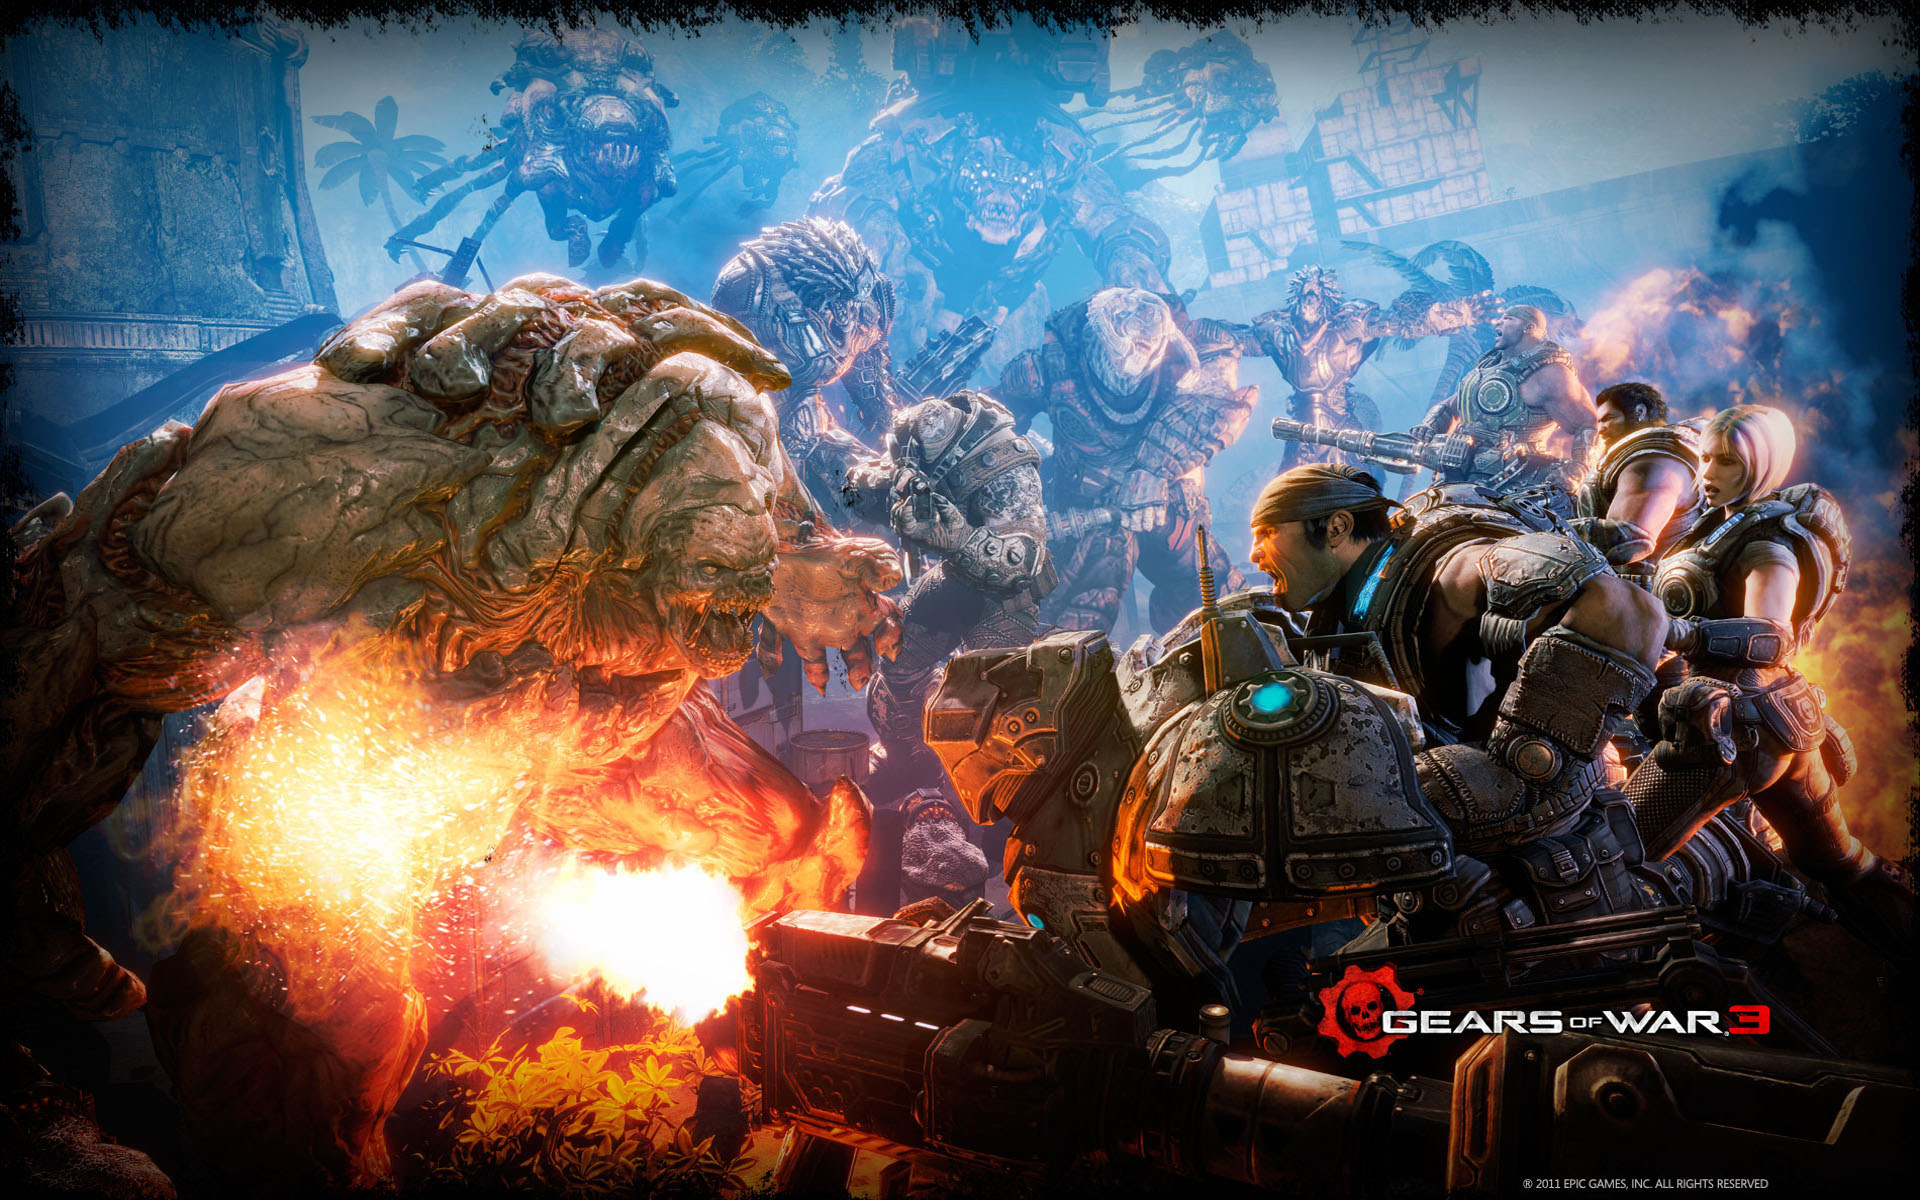  Resolution Wallpapers Pictures Gears of War 3 Wallpapers 1920x1200